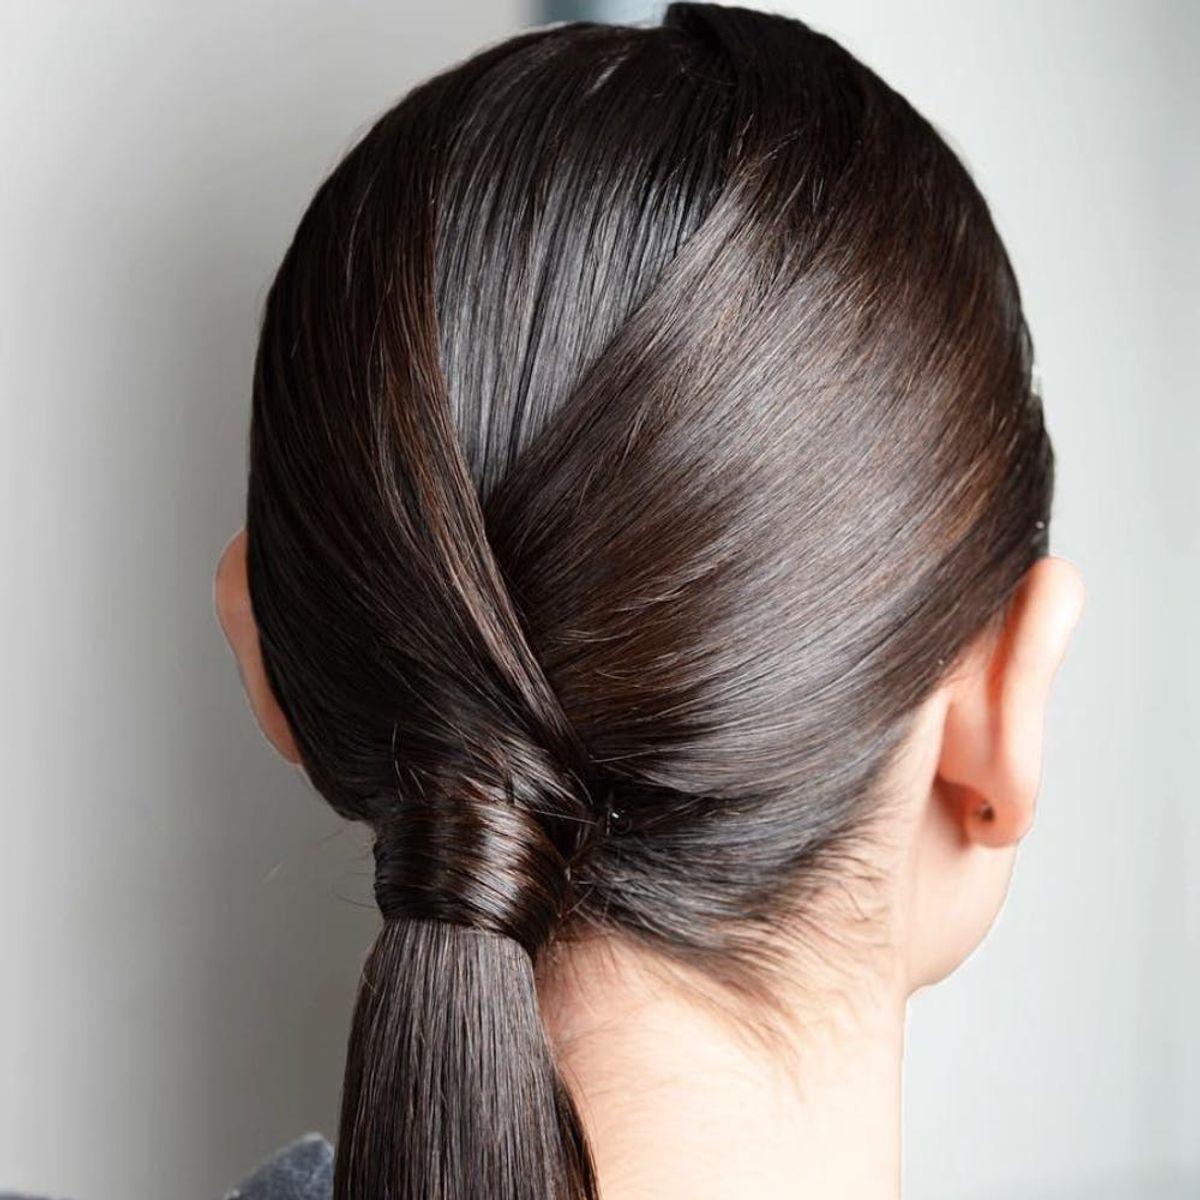 How to Score Your Shiniest Hair Yet (Without a Salon Trip)